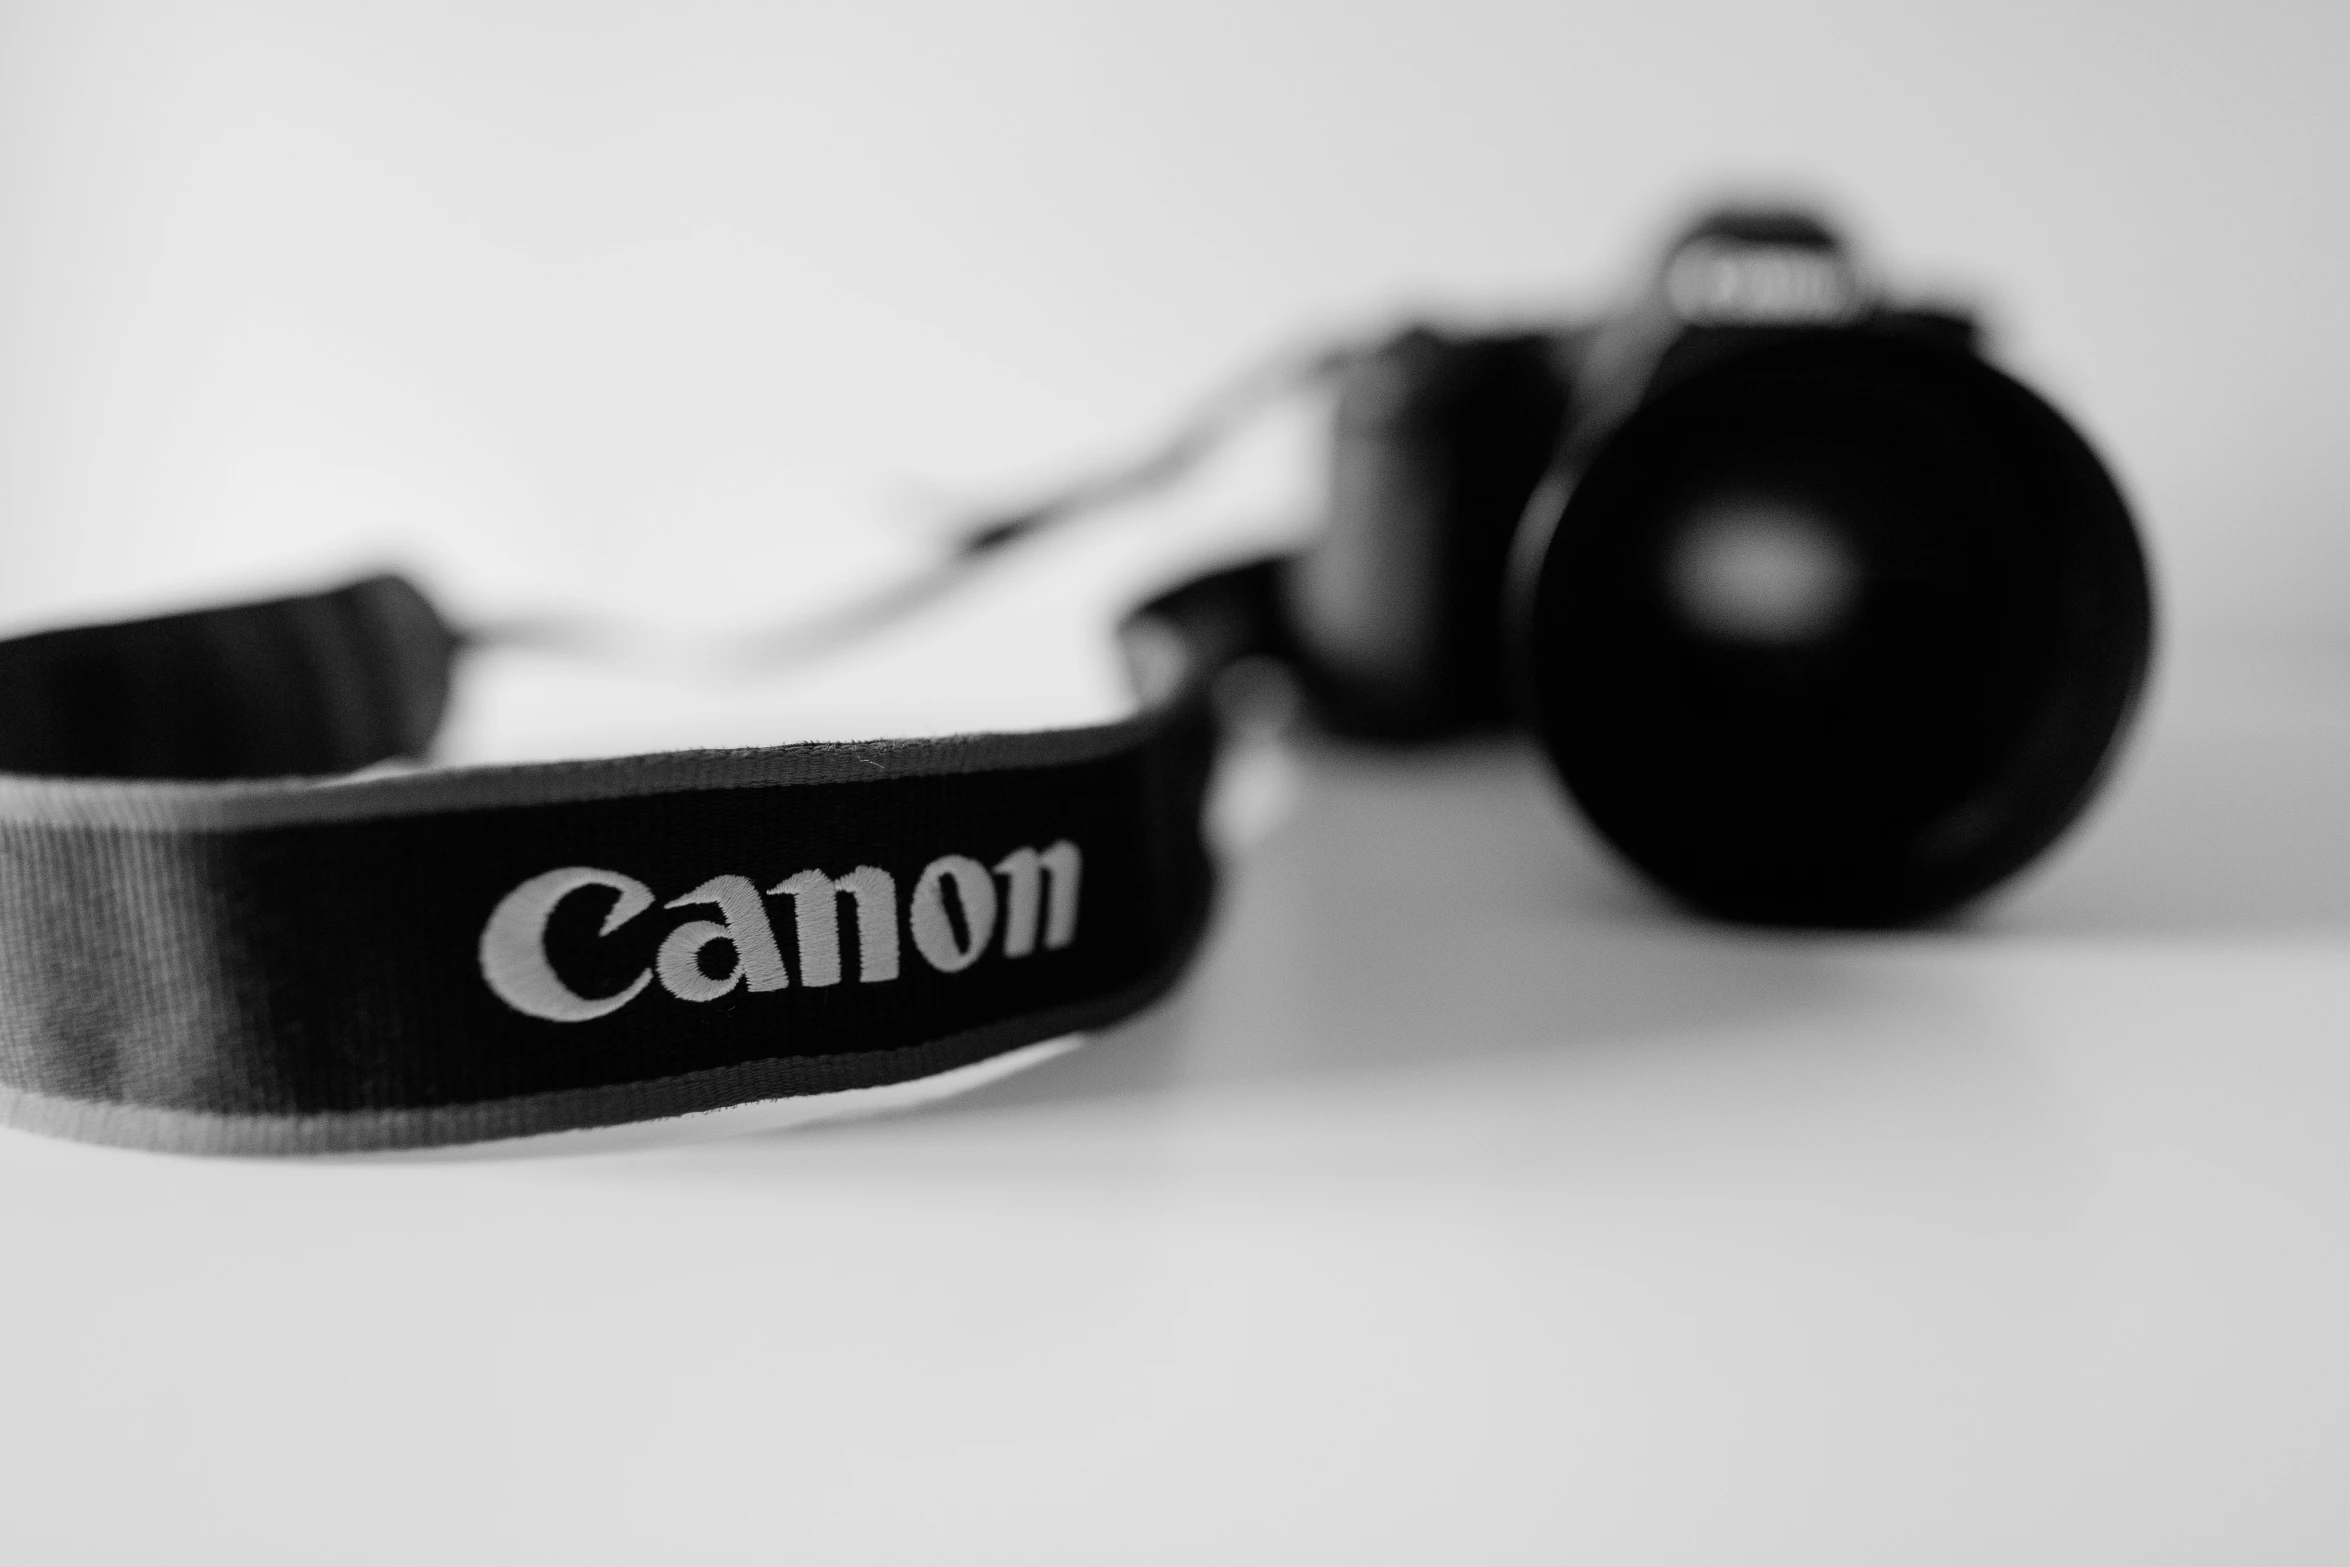 camera strap with canon logo on it sitting on the table